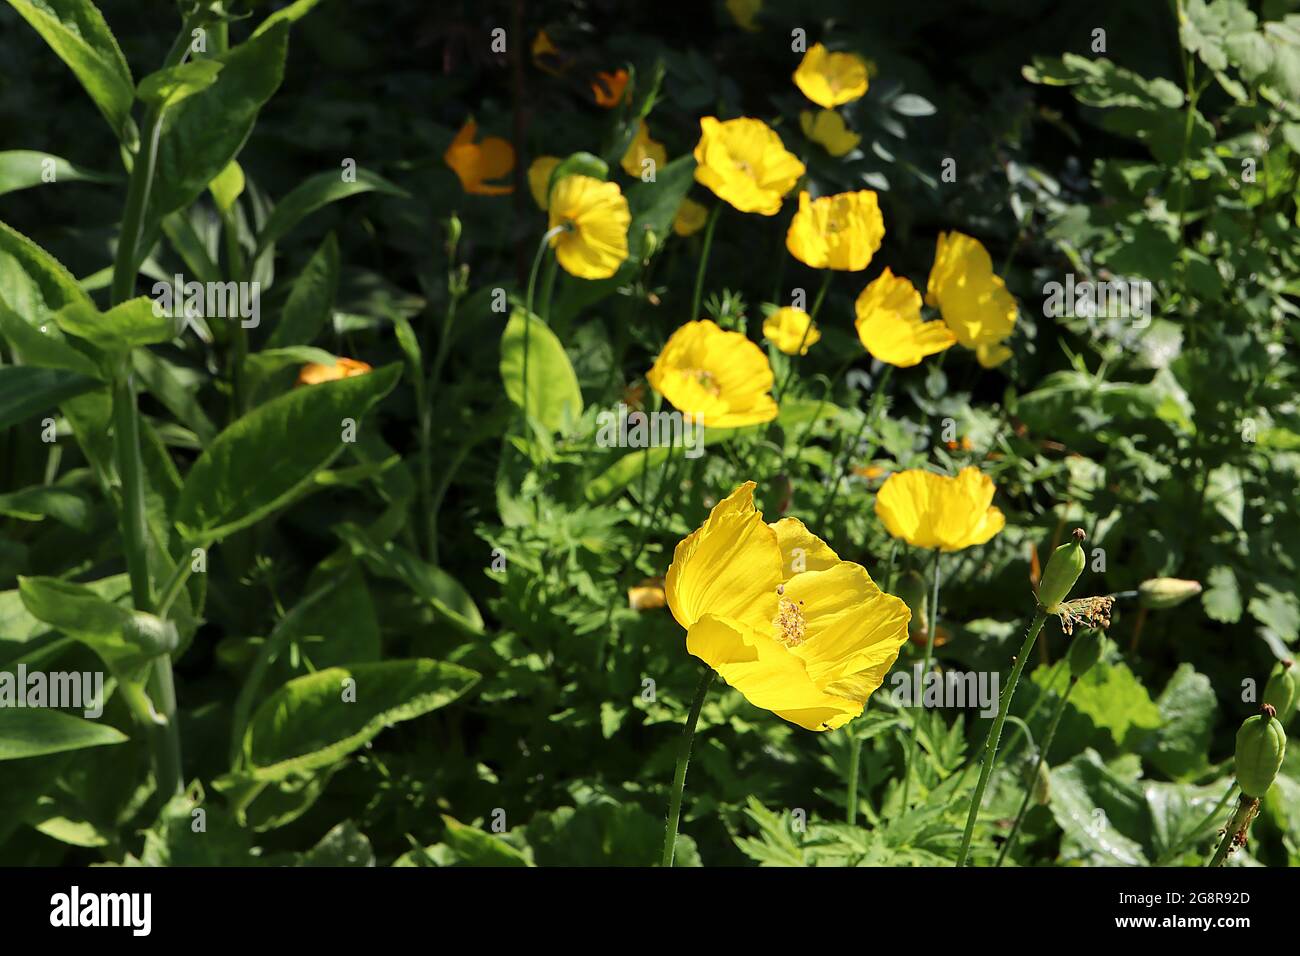 Papaver / Meconopsis cambricum Welsh poppy – orange yellow crinkly petals and toothed pinnate leaves,  May, England, UK Stock Photo